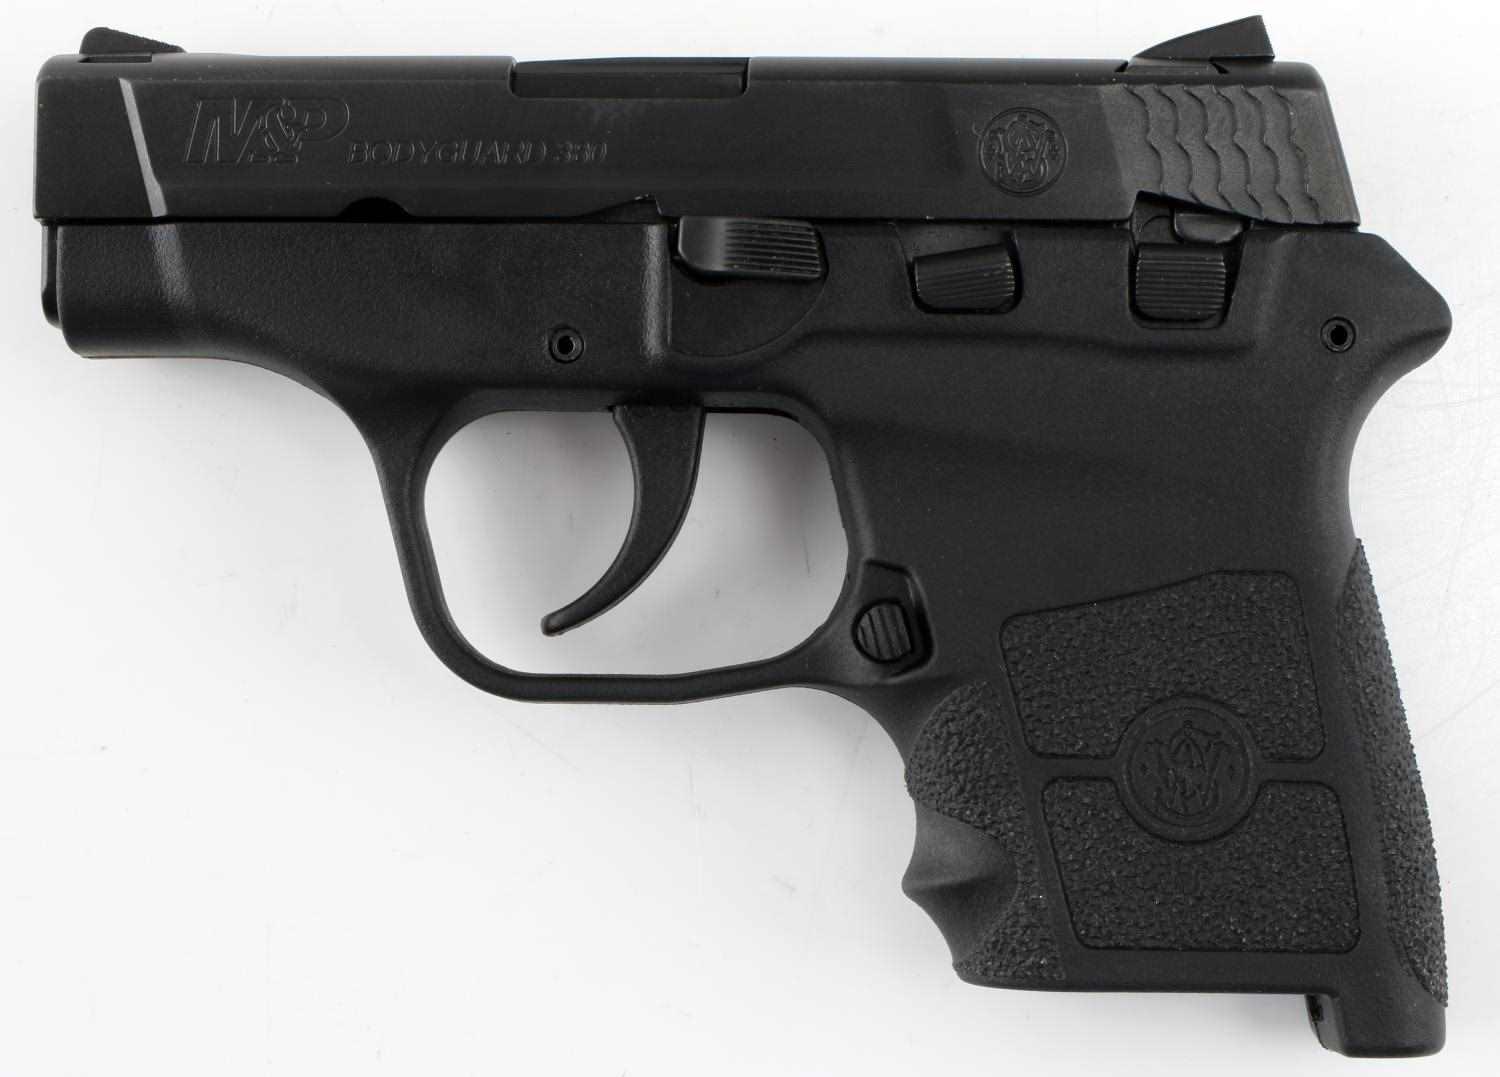 SMITH AND WESSON M&P BODYGUARD 380 PISTOL